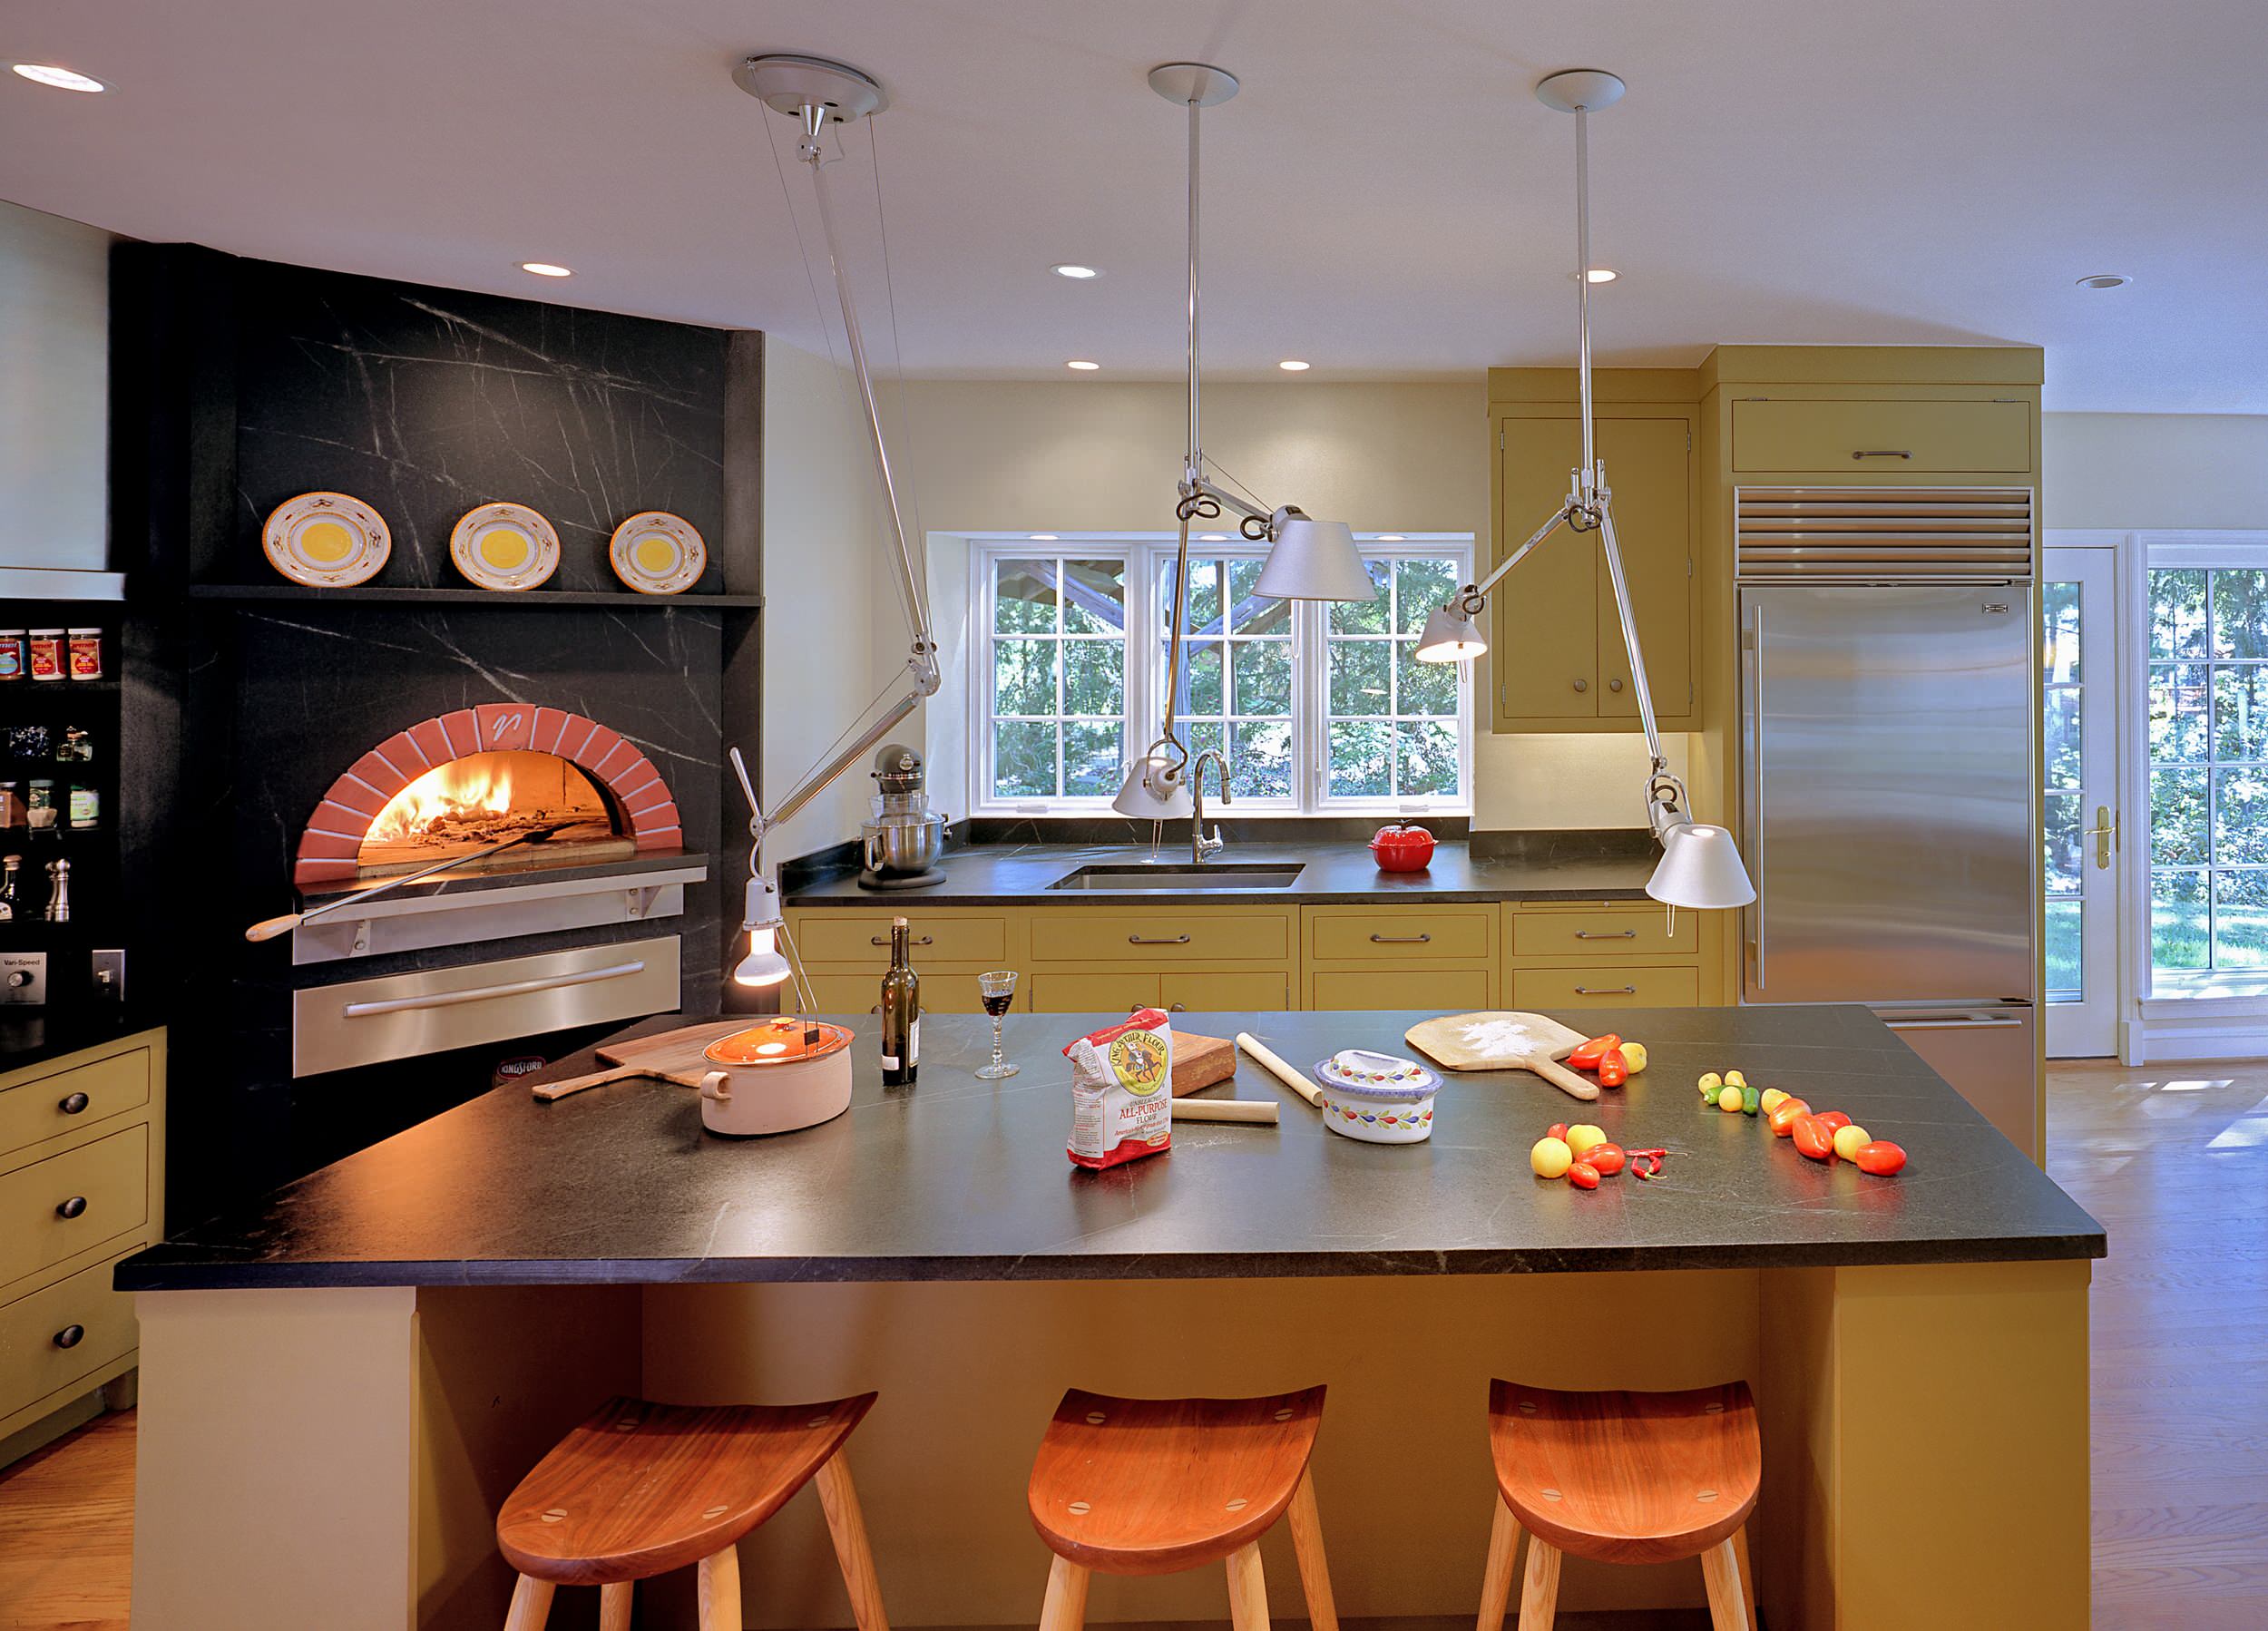 Indoor Wood Fired Pizza Ovens - Transitional - Kitchen - San Francisco - by  Mugnaini | Houzz